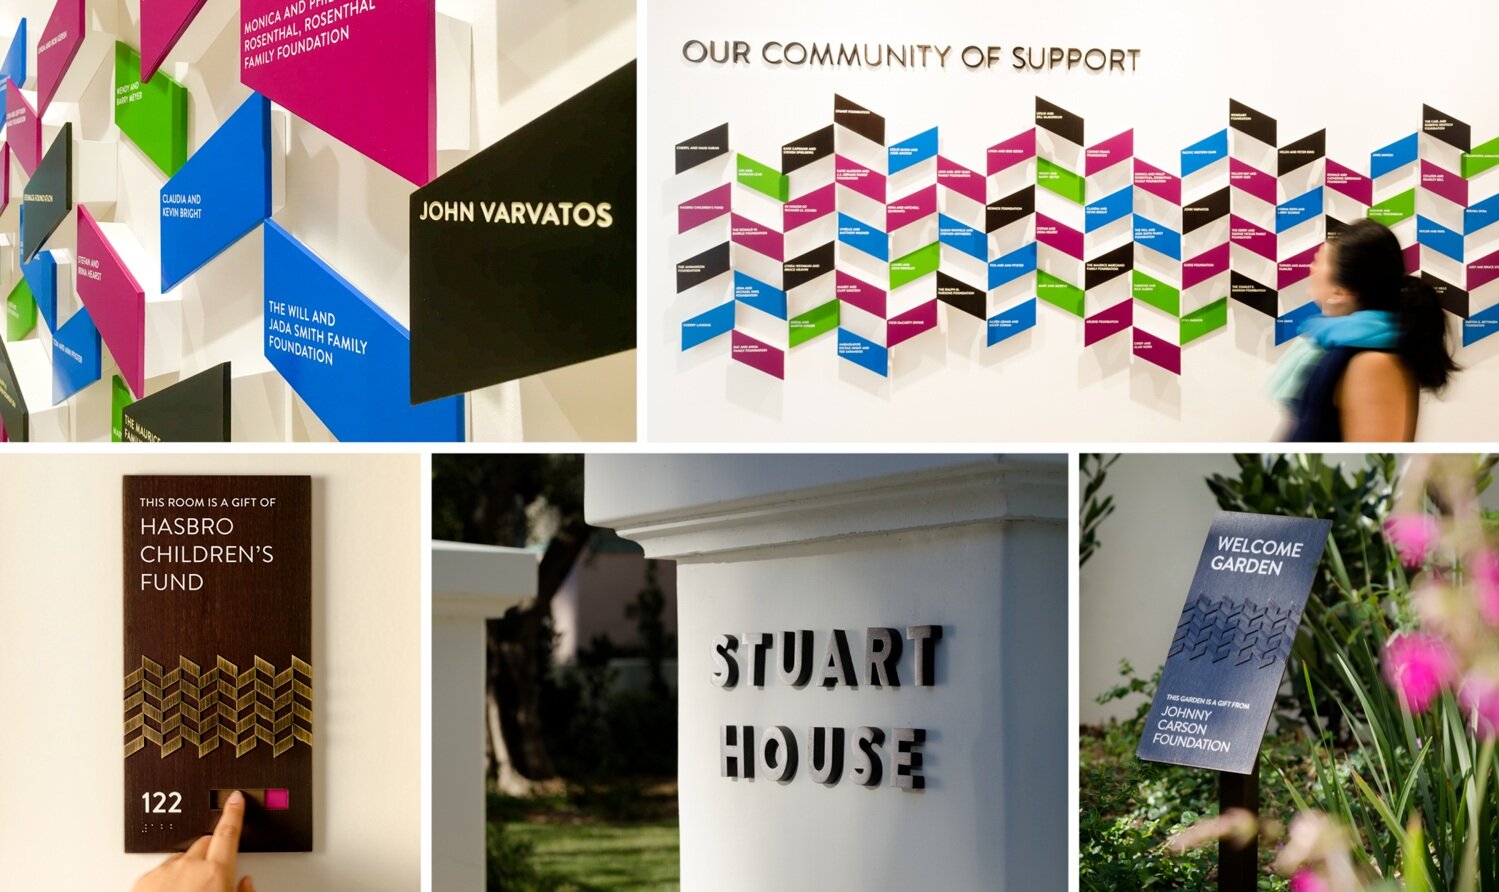 Stuart House. The idea of “what we make when we come together” was extended from the donor wall design to the entire donor and signage program.